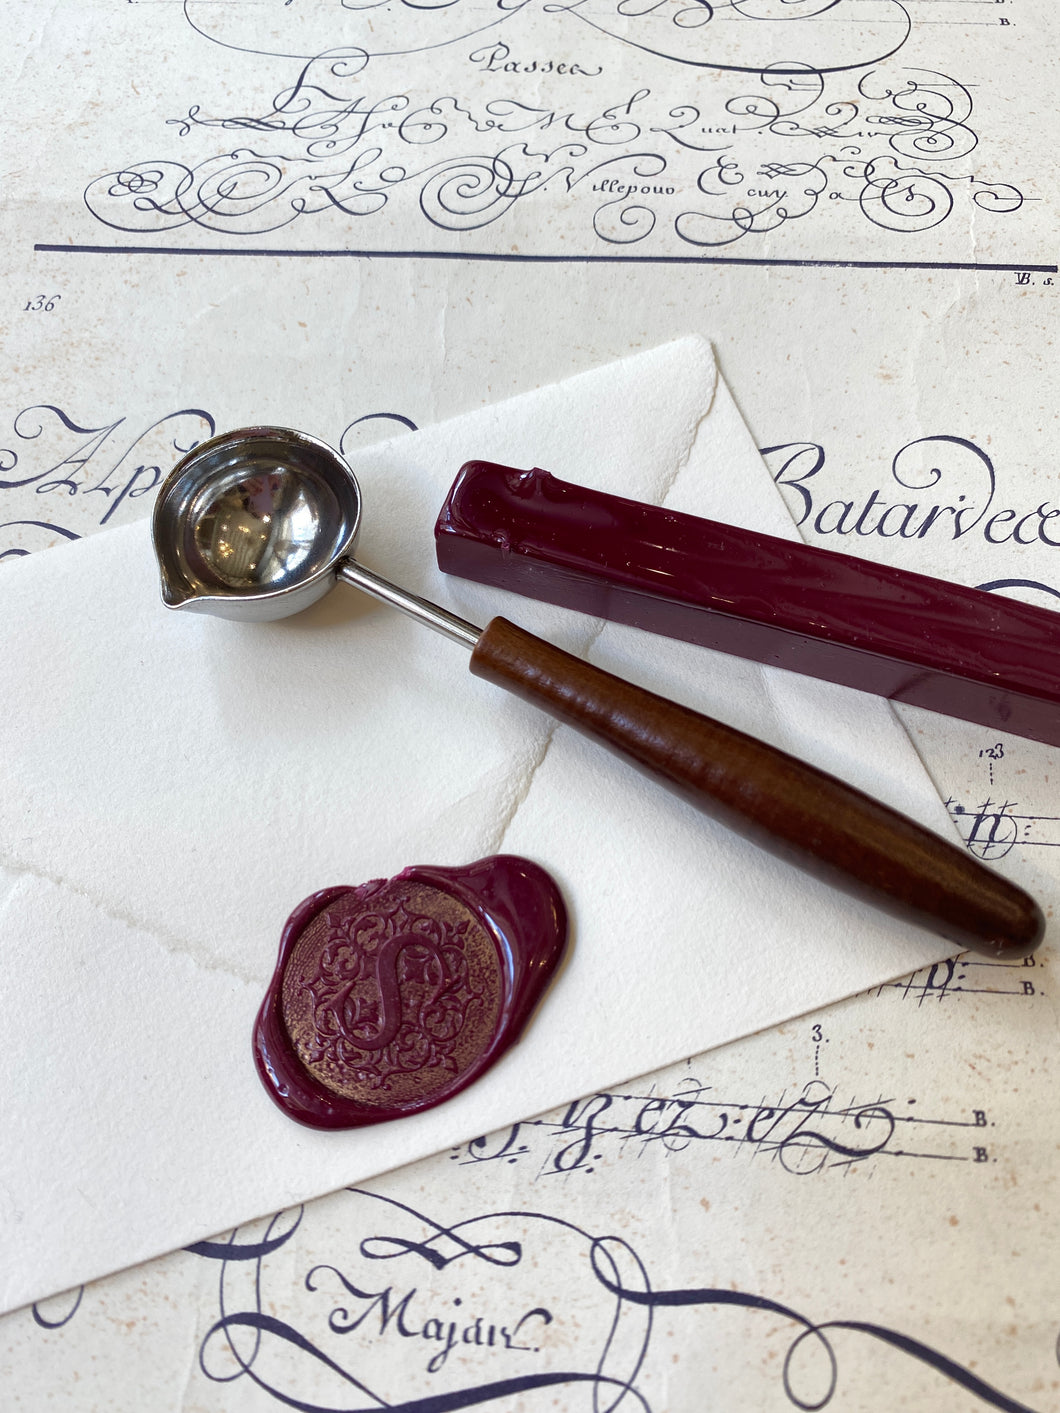 Sealing wax melting spoon / シーリングワックス用スプーン / Cuillère pour cire à cacheter